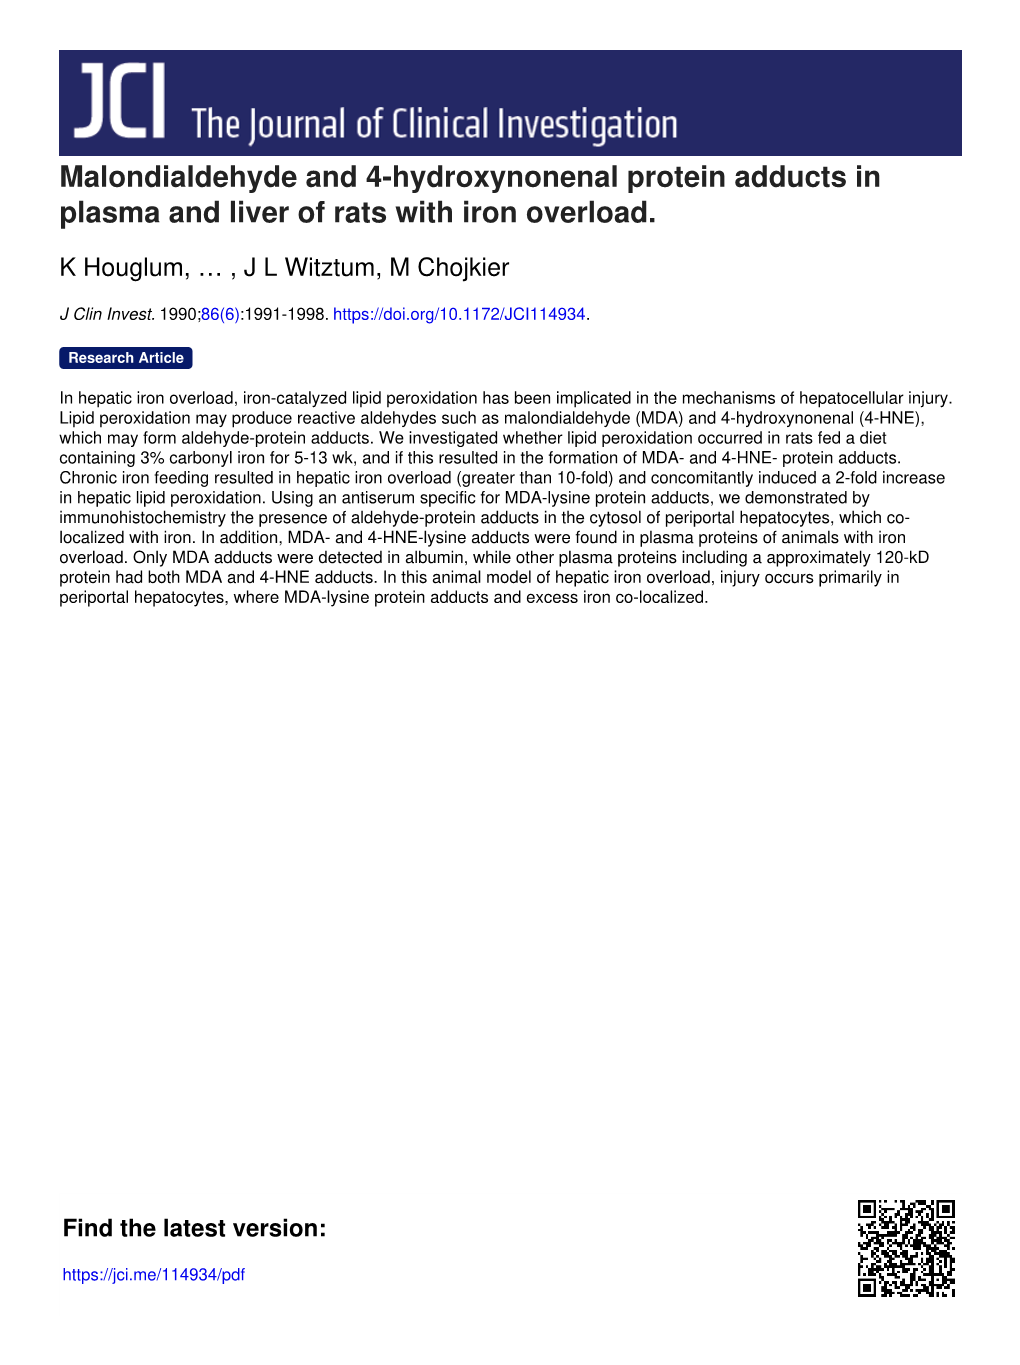 Malondialdehyde and 4-Hydroxynonenal Protein Adducts in Plasma and Liver of Rats with Iron Overload